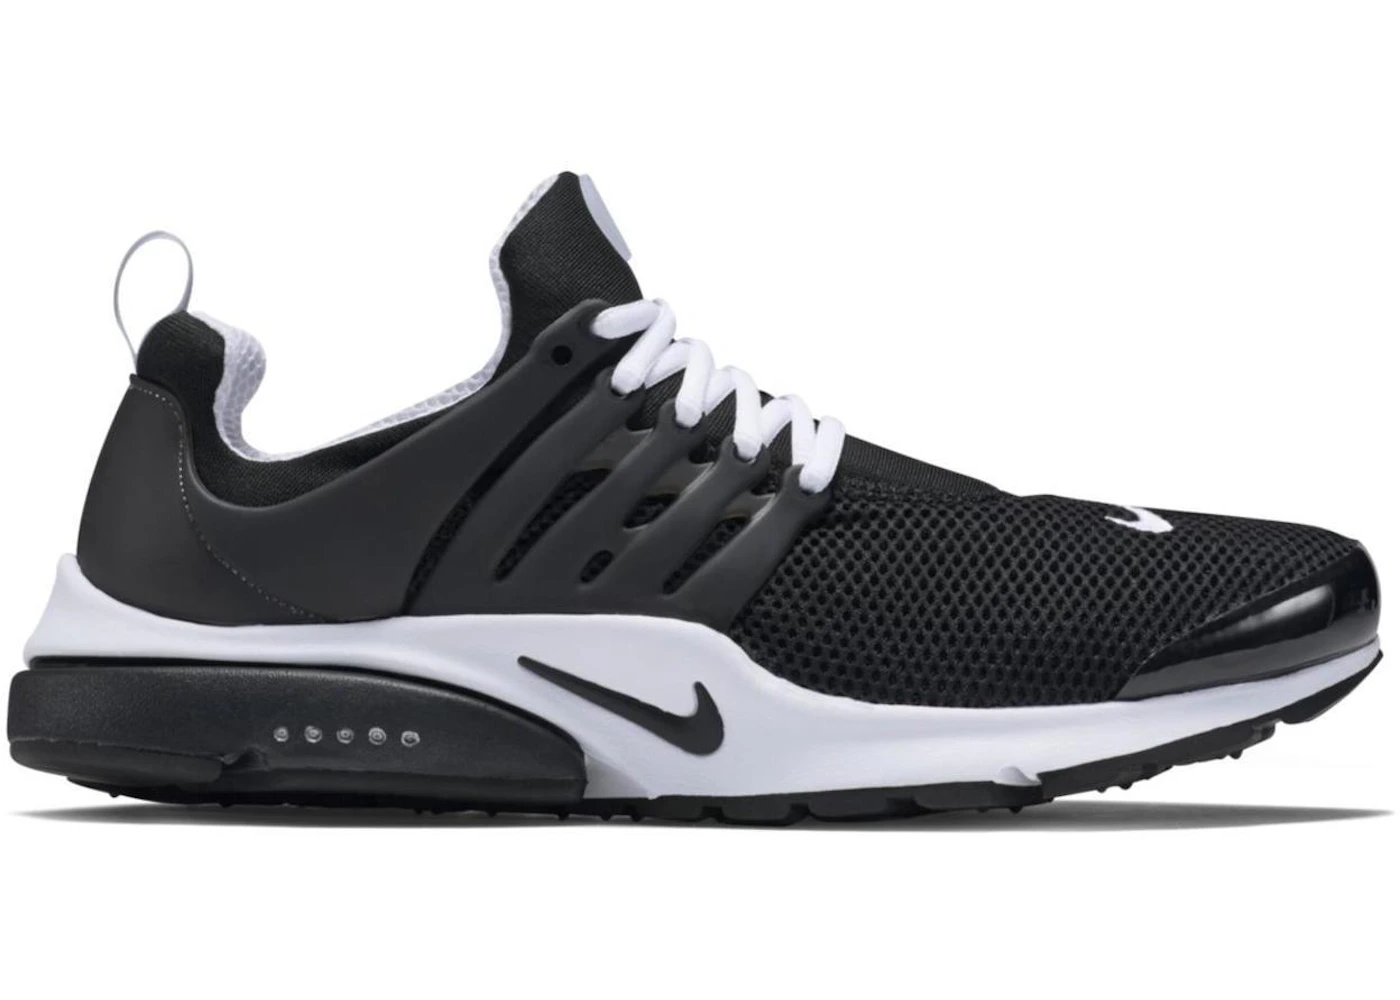 Hunger double chemicals Nike Air Presto Black White - 789869-001 - US